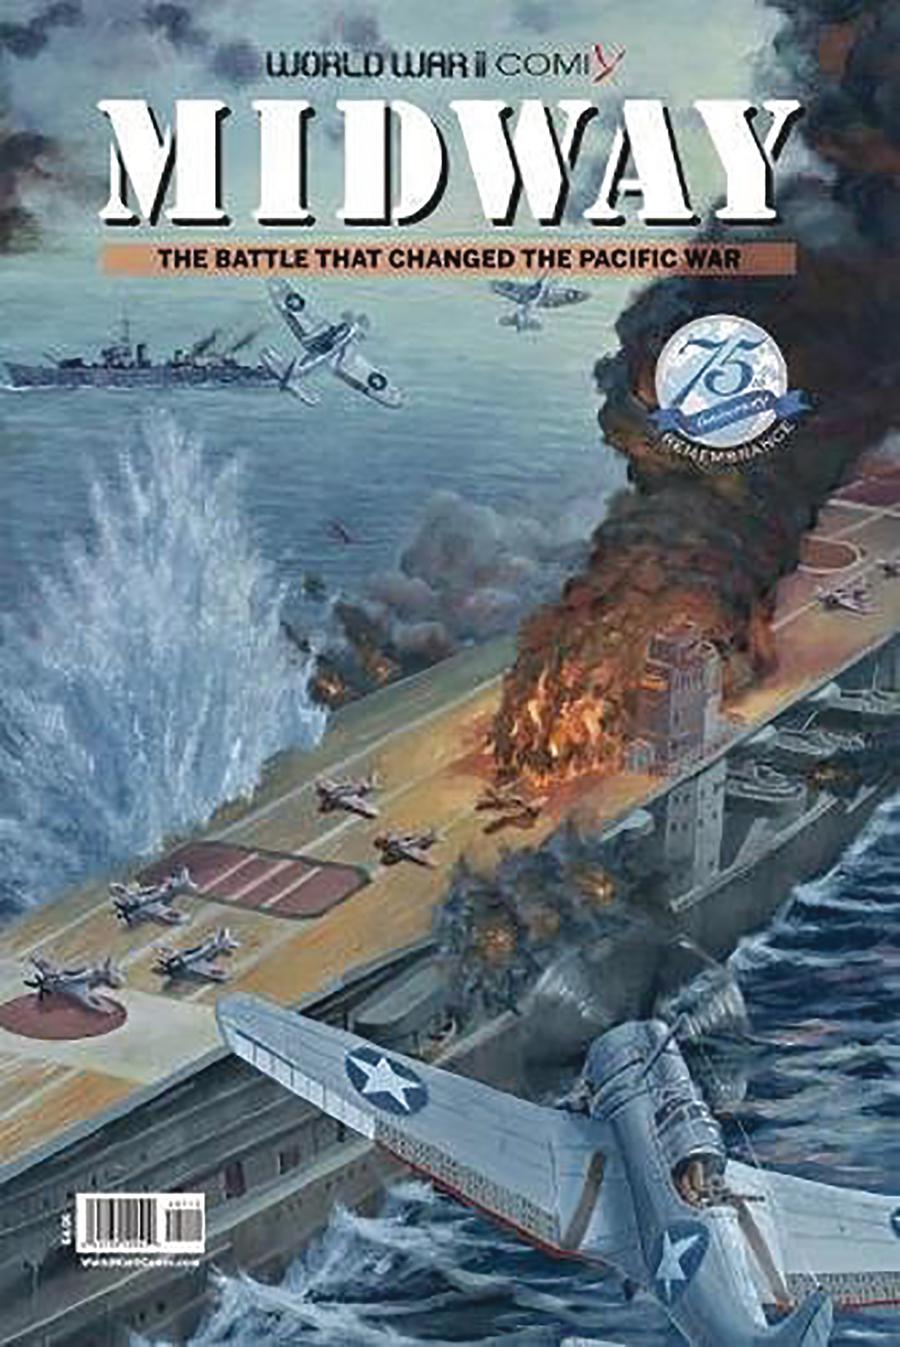 World War II Comix Midway The Battle That Changed The Pacific War